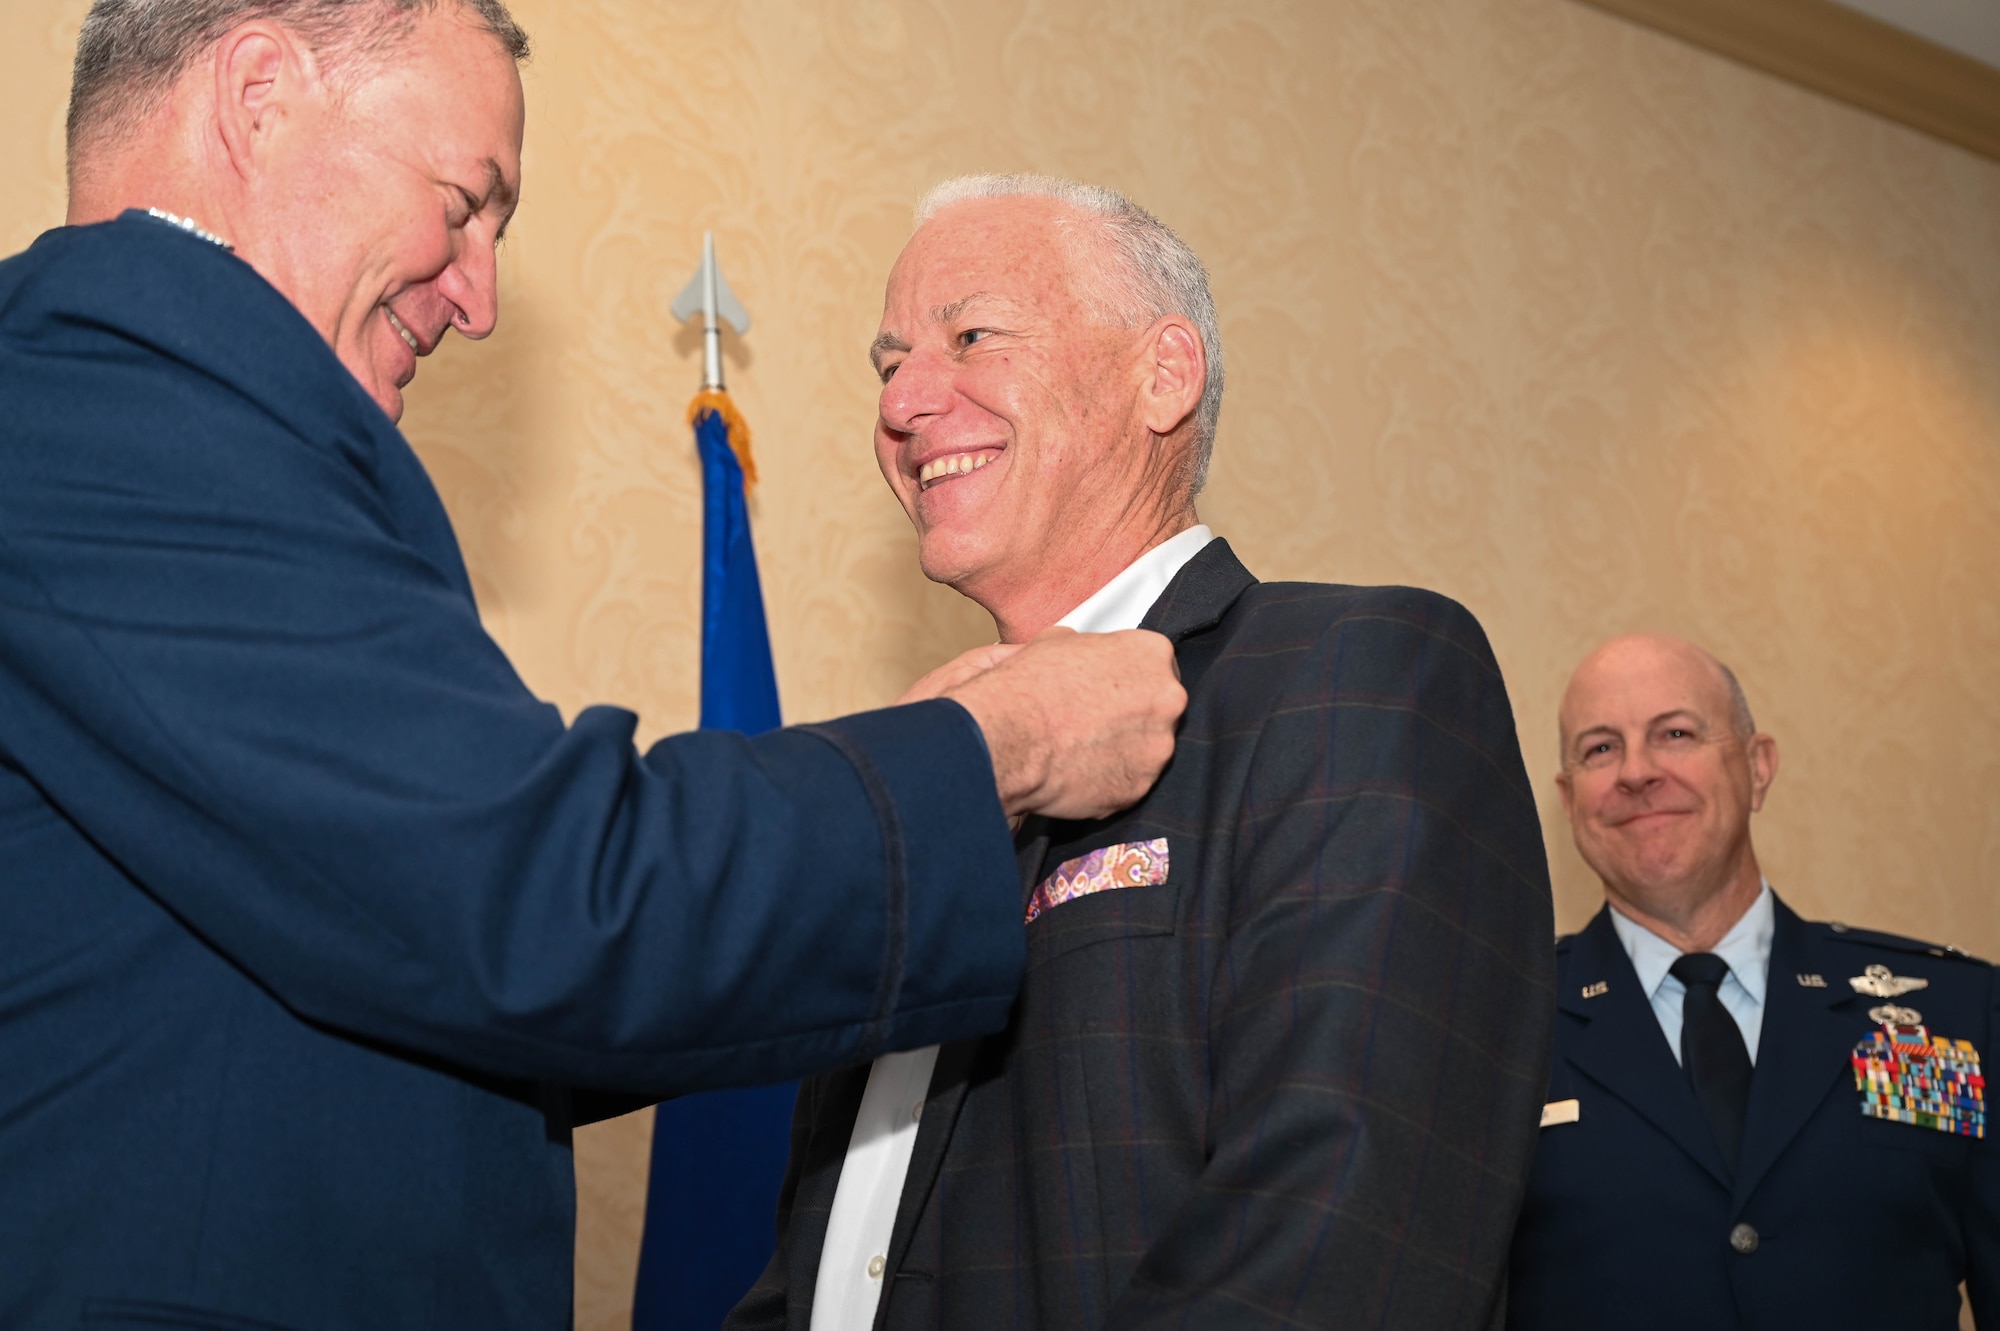 Tim Handren, City of Boerne mayor, receives an Air Force commander’s insignia pin from Col. Terry McClain, 433rd Airlift Wing commander, during the Honorary Commanders’ induction ceremony in San Antonio, April 2, 2022. The intent of the 433rd AW Honorary Commanders Program is to foster friendship between local and military communities. (U.S. Air Force photo by Airman 1st Class Mark Colmenares)